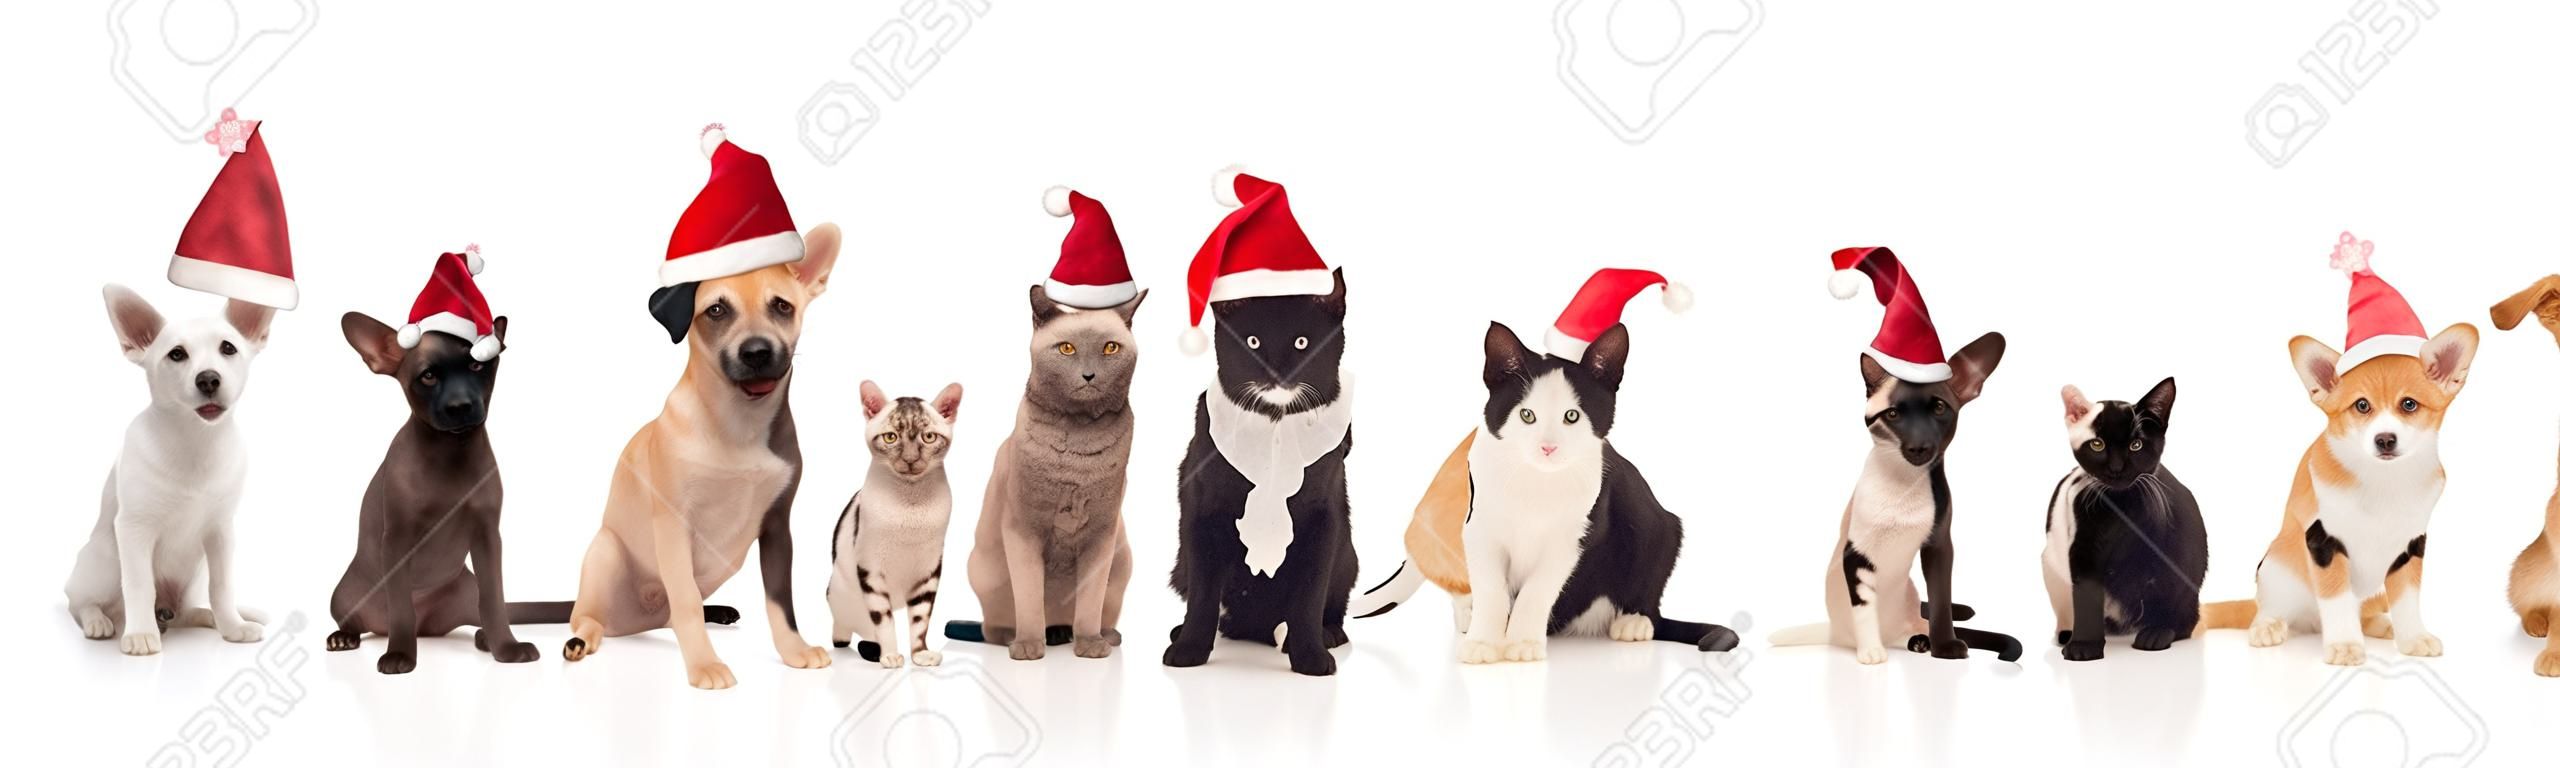 happy santa cats and dogs panting while sitting and standing on white background